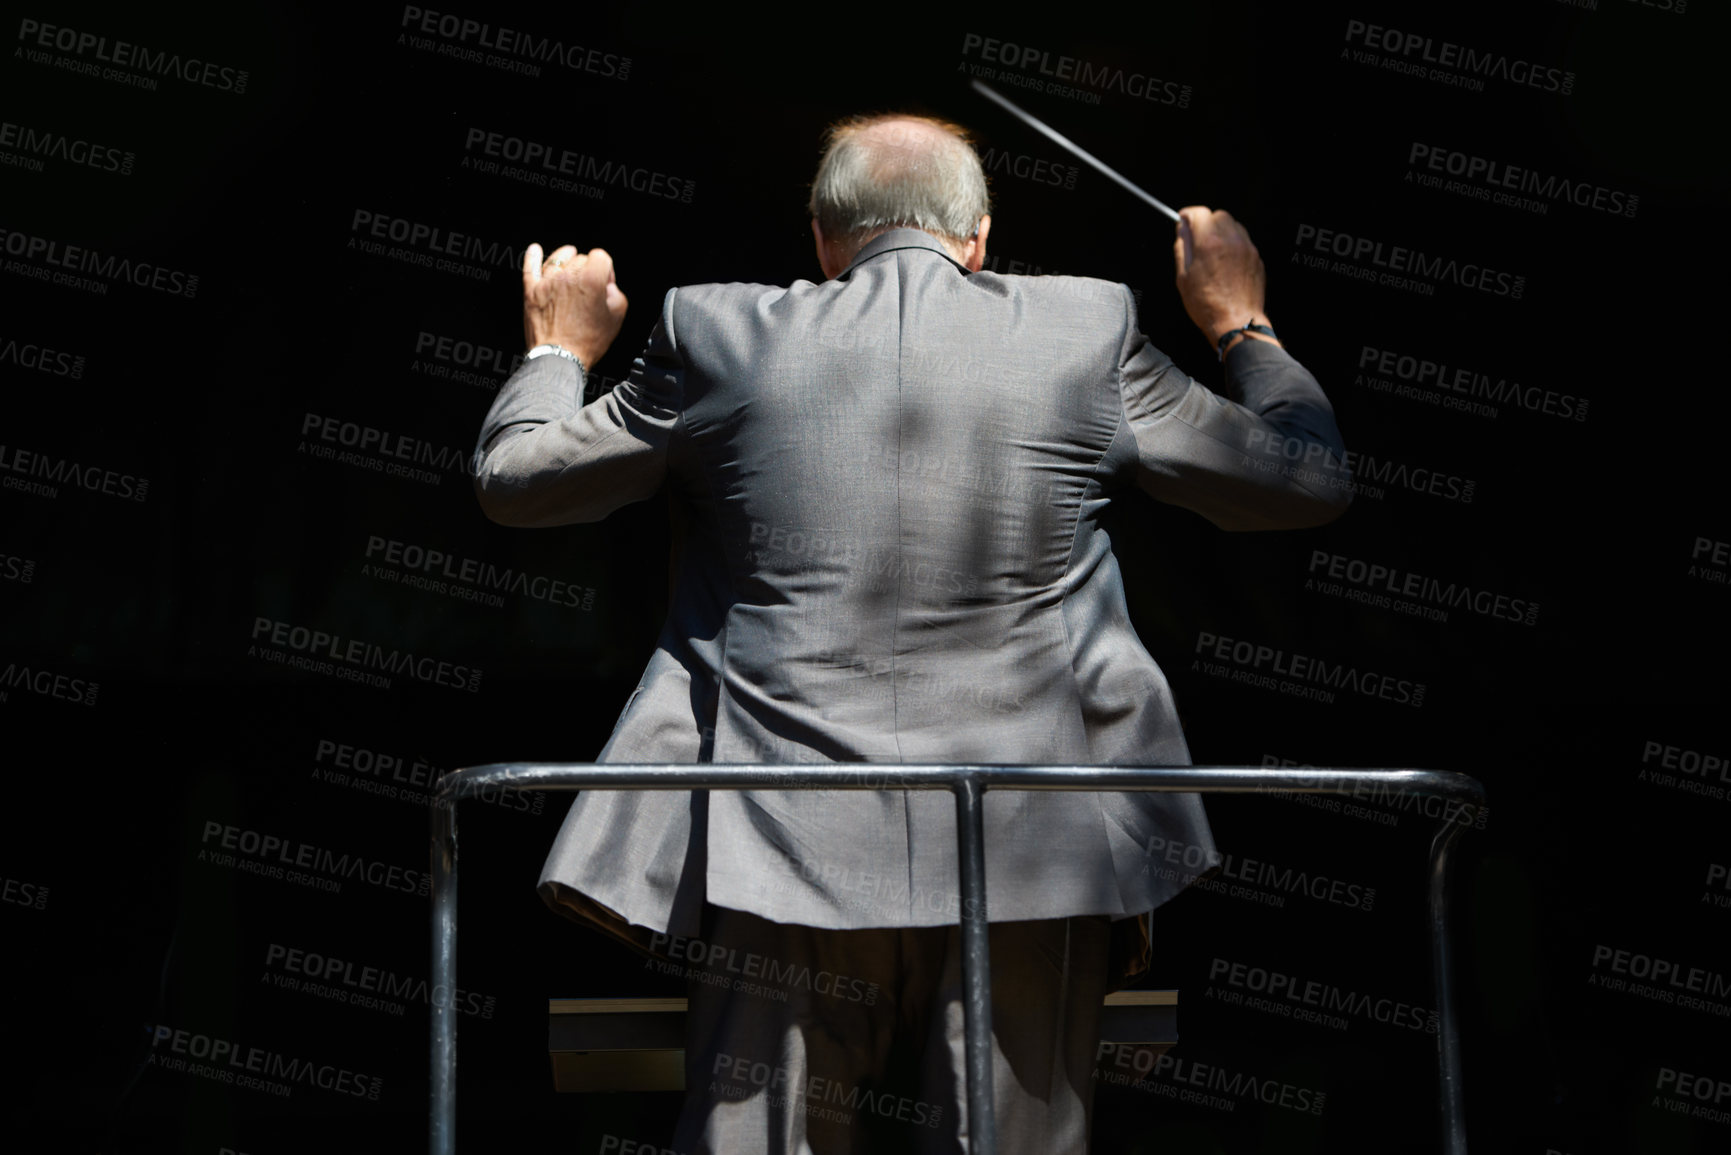 Buy stock photo Cropped rear view of an orchestra conductor waving his baton